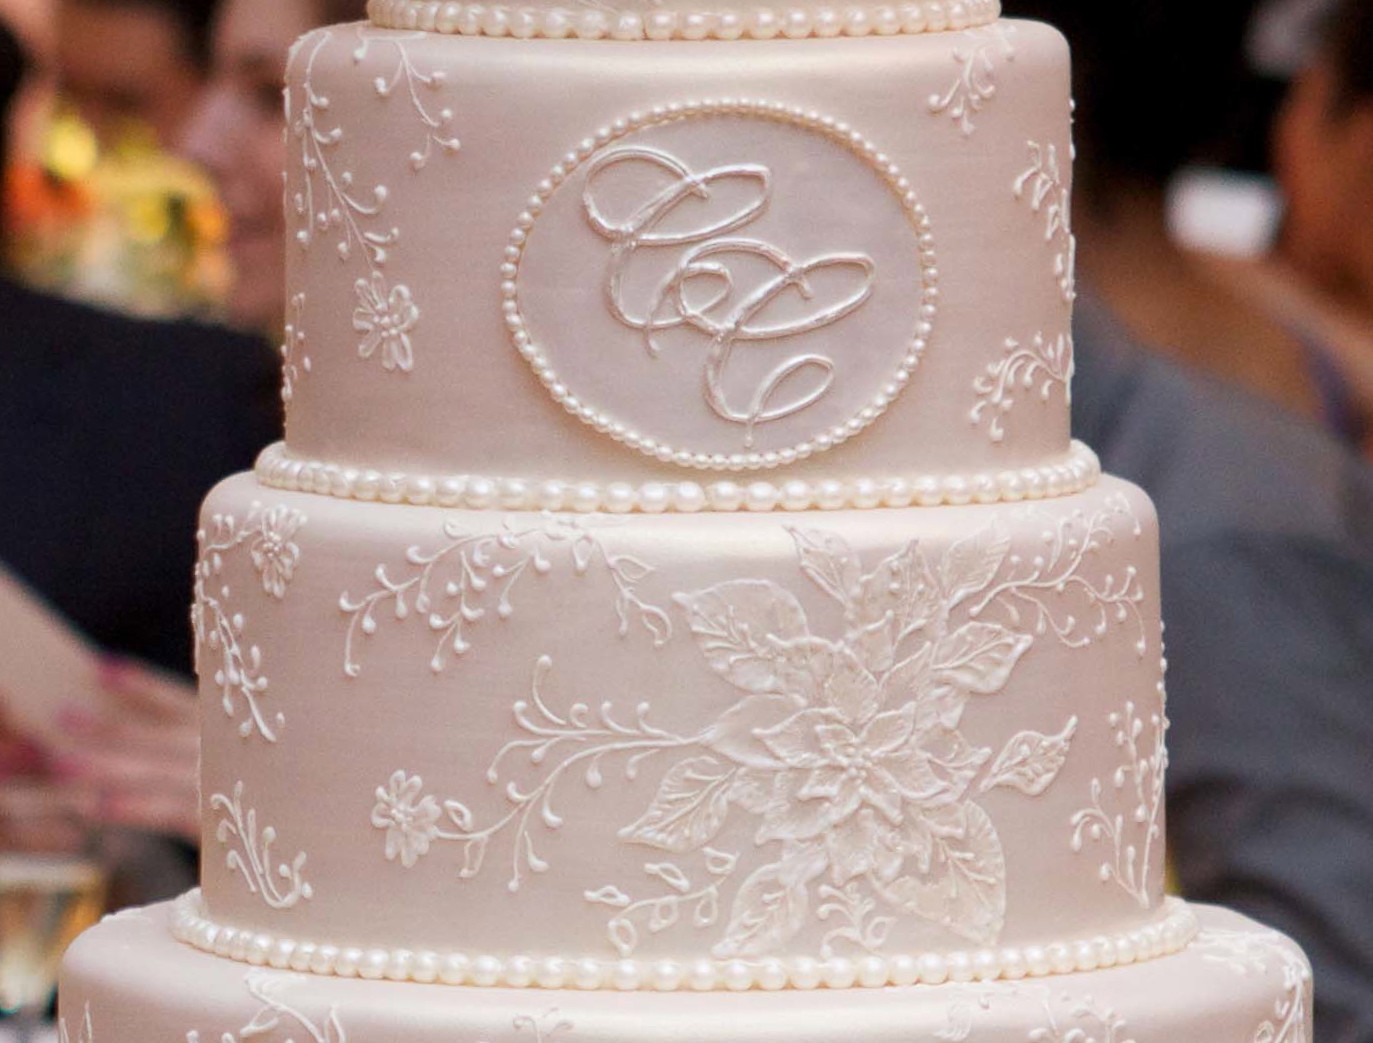 Wedding Cakes Monogram
 For the Love of Cake by Garry & Ana Parzych A Spring